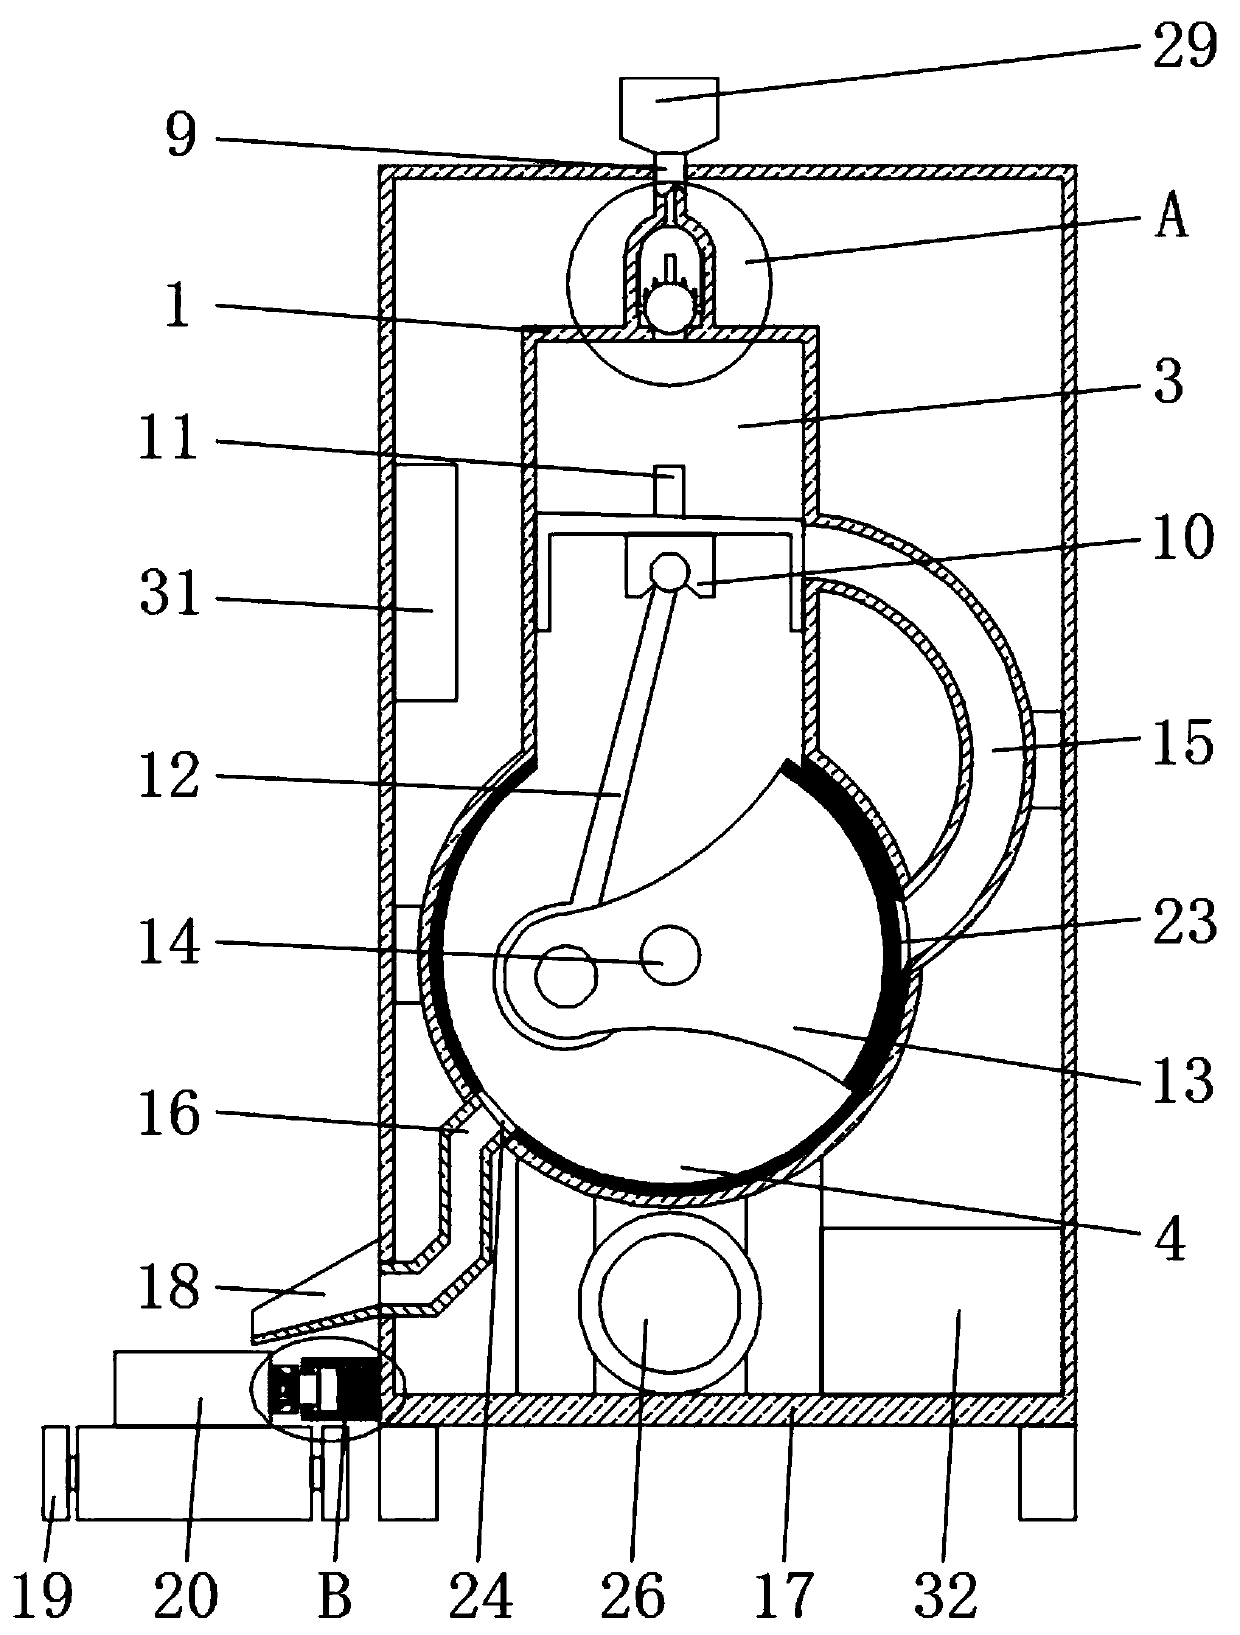 Periodic material crushing and grinding device